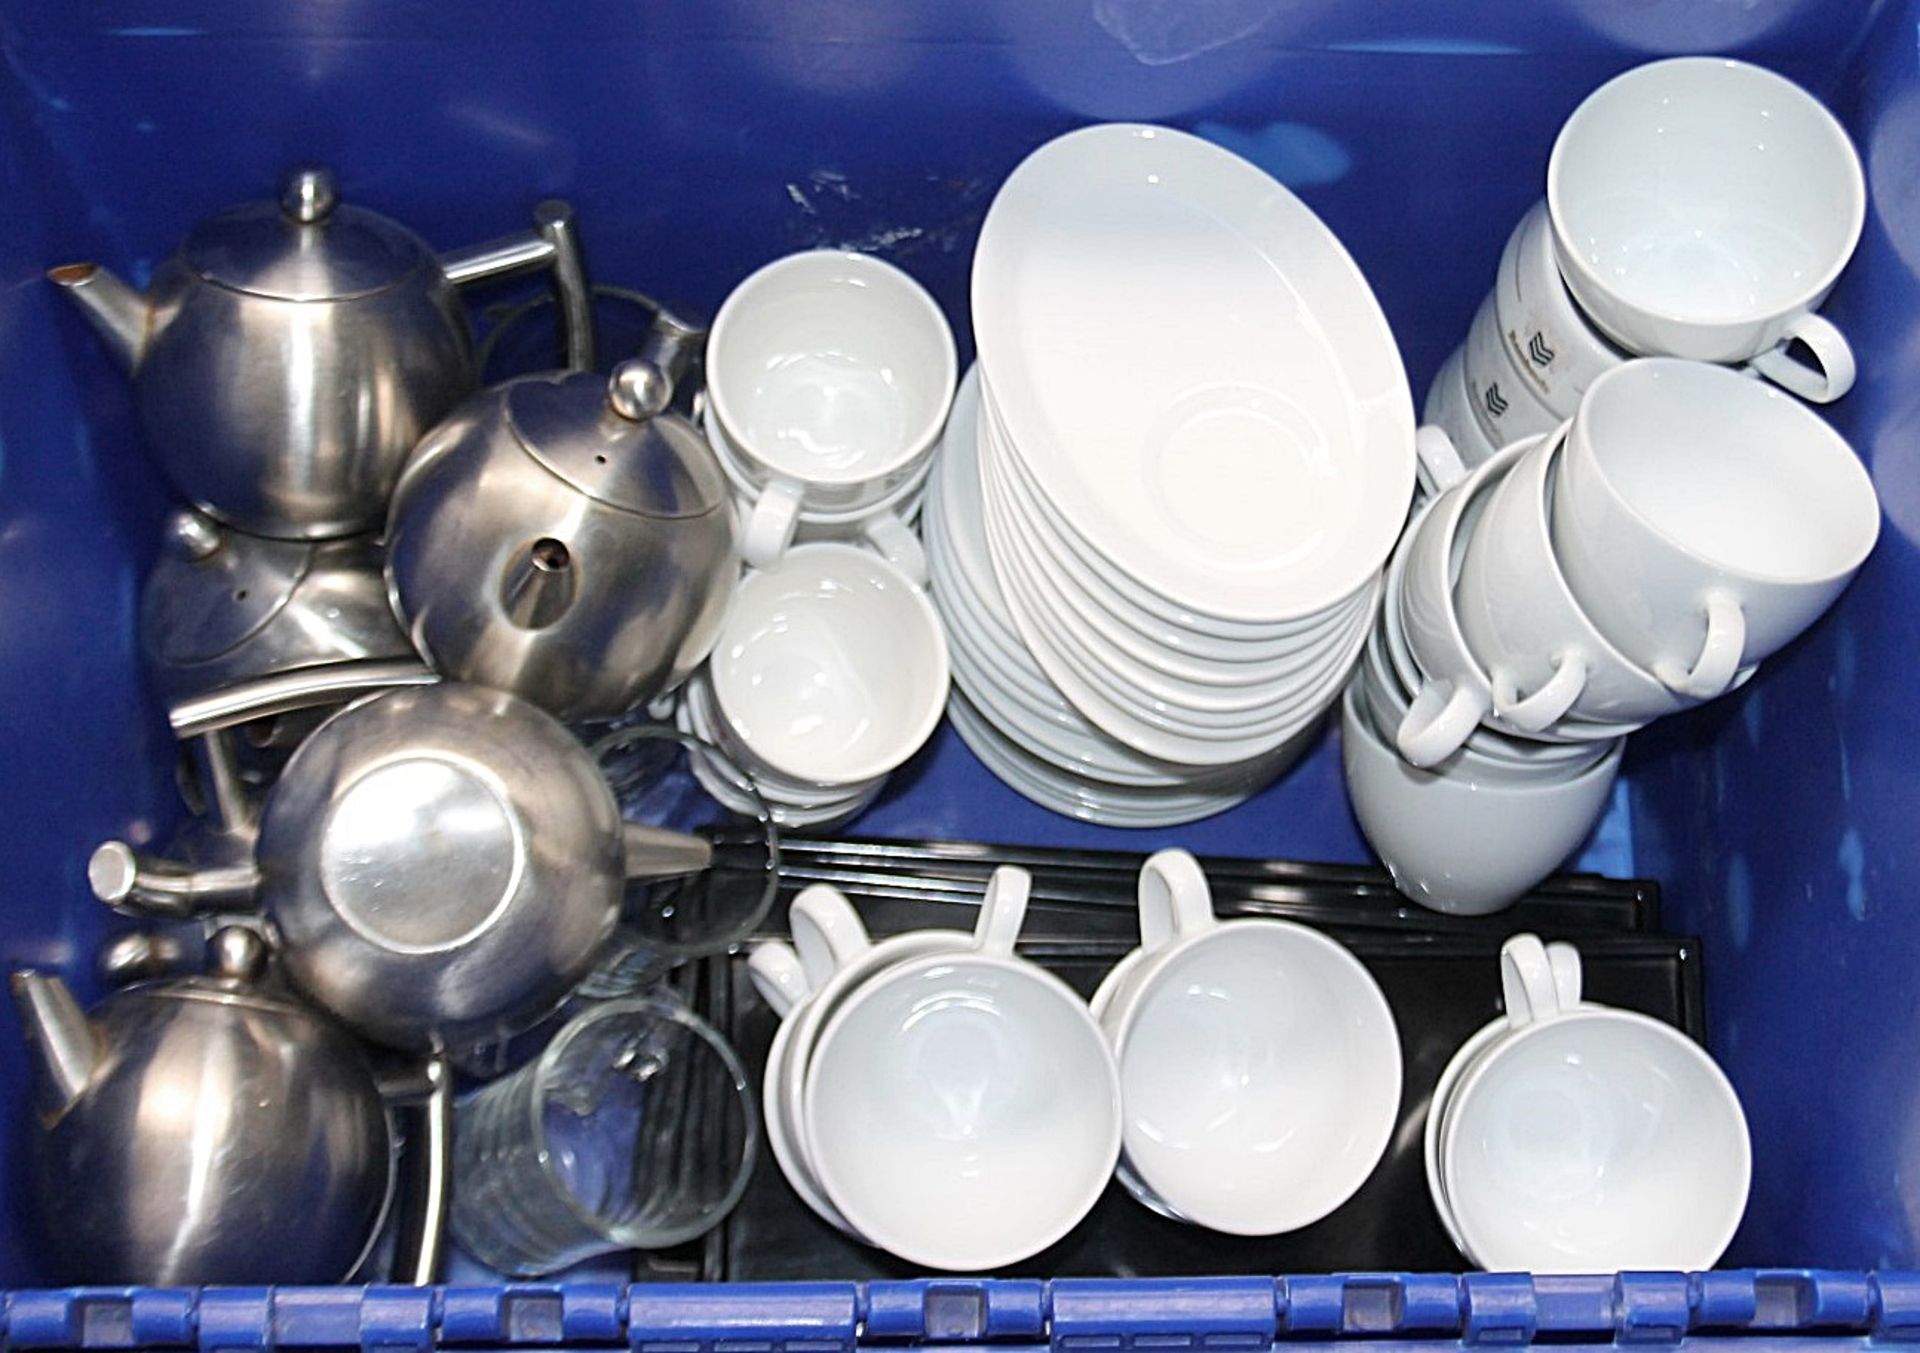 Large Assortment Of Ceramic Tableware, Metal Teapots And Glassware - 72 x Pieces In Total - Recently - Image 13 of 13